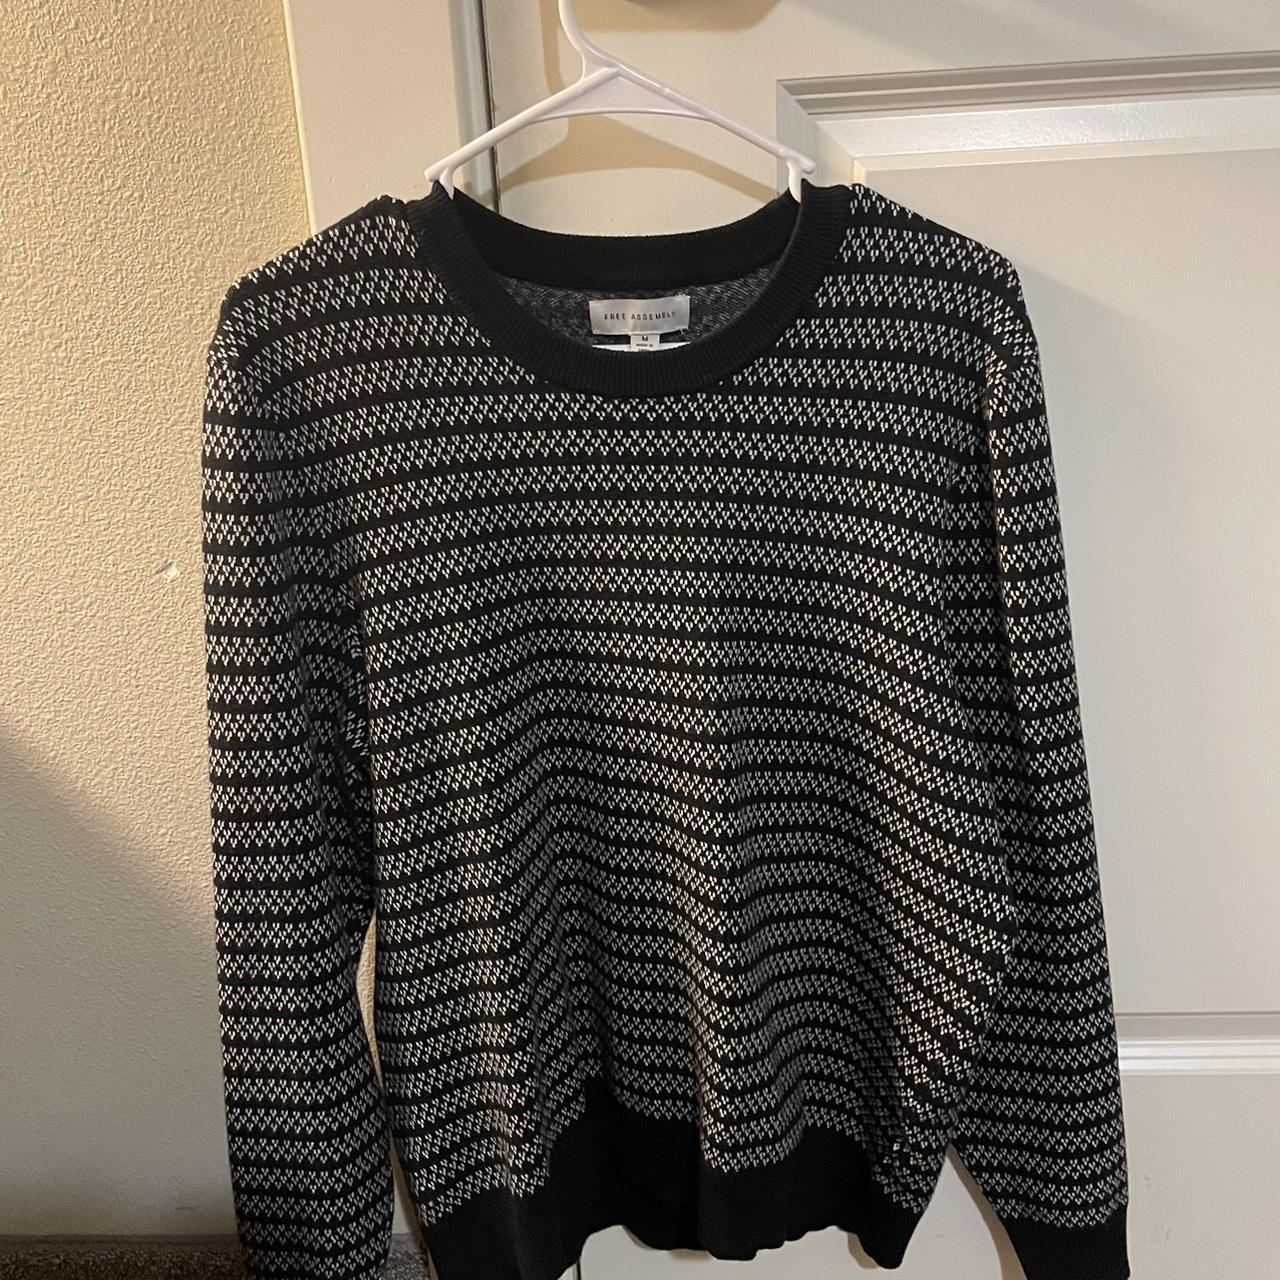 Black and white patterned crew neck in perfect... - Depop